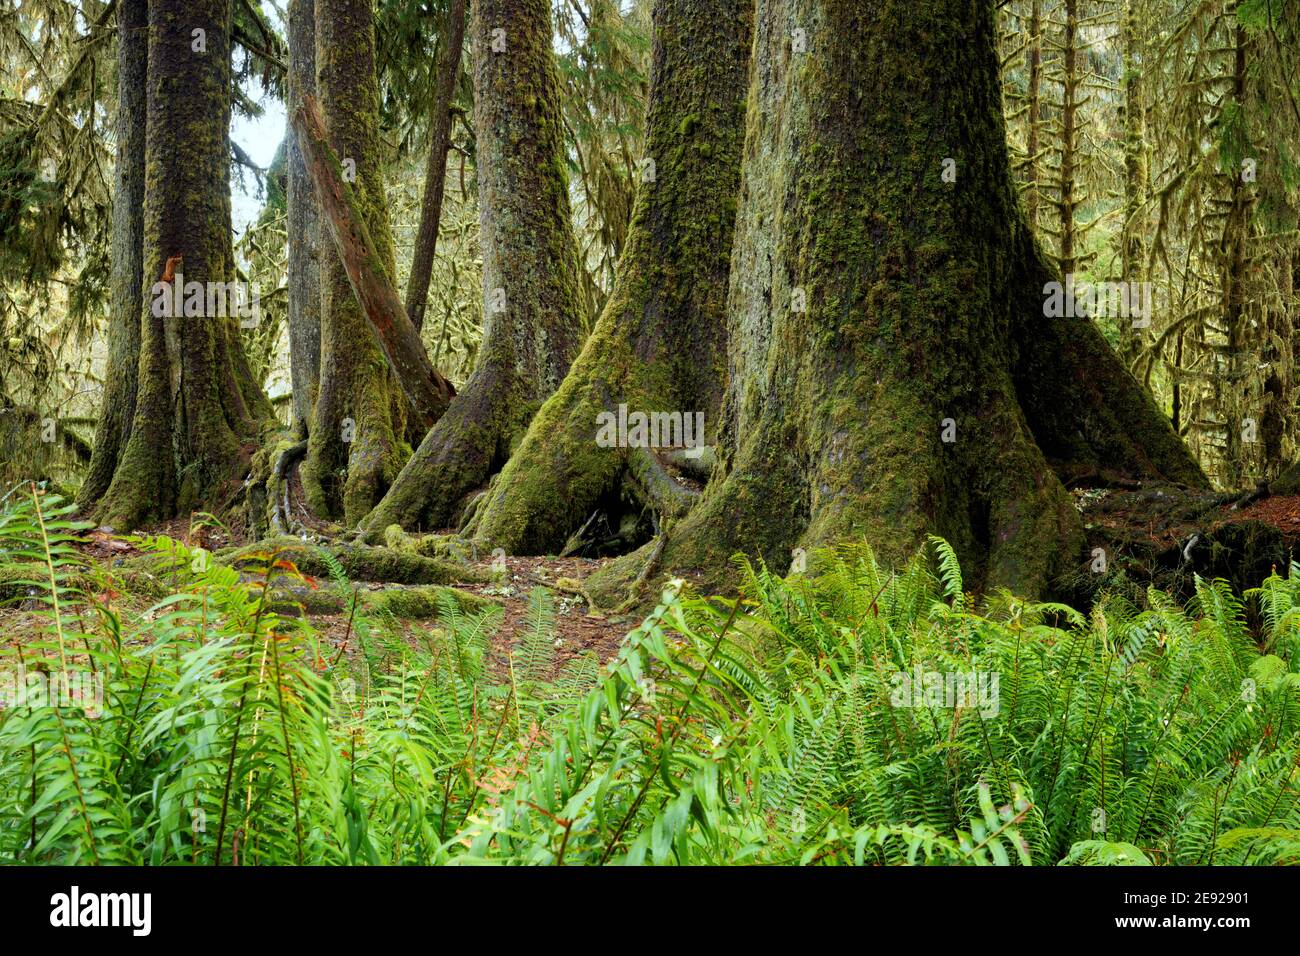 Western sword fern (Polystichum munitum) and trunks of Sitka spruce trees growing in a line on a fallen nurse log, Spruce Nature Trail, Hoh Rain Fores Stock Photo